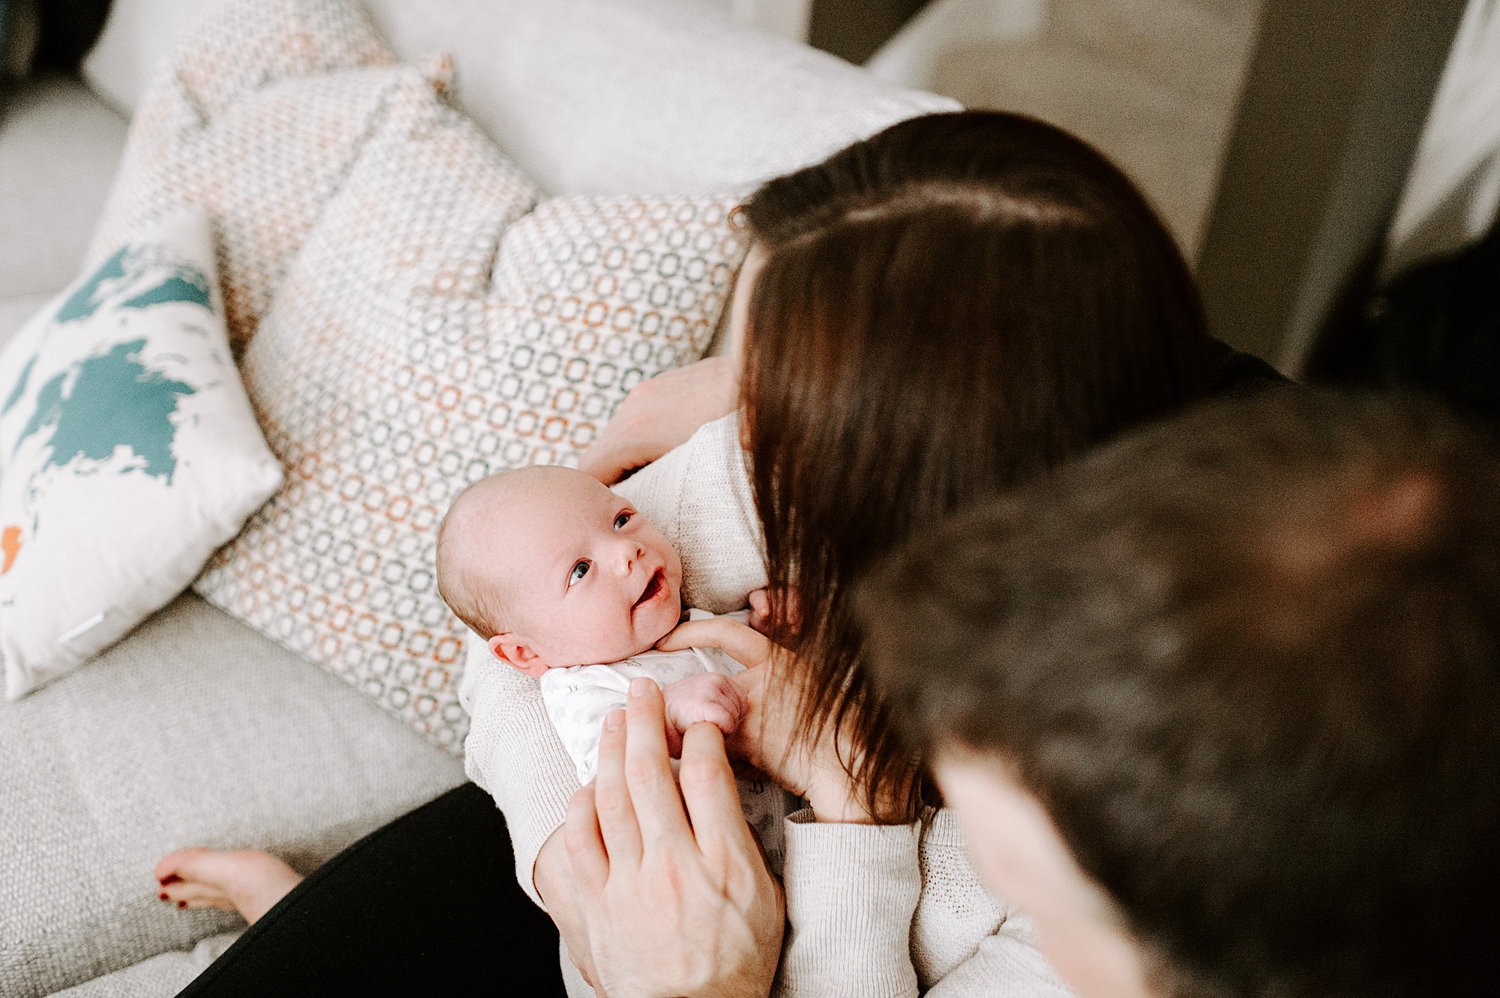 In-home Lifestyle Newborn Session with Seattle Newborn Photographer, Meg Newton Photography